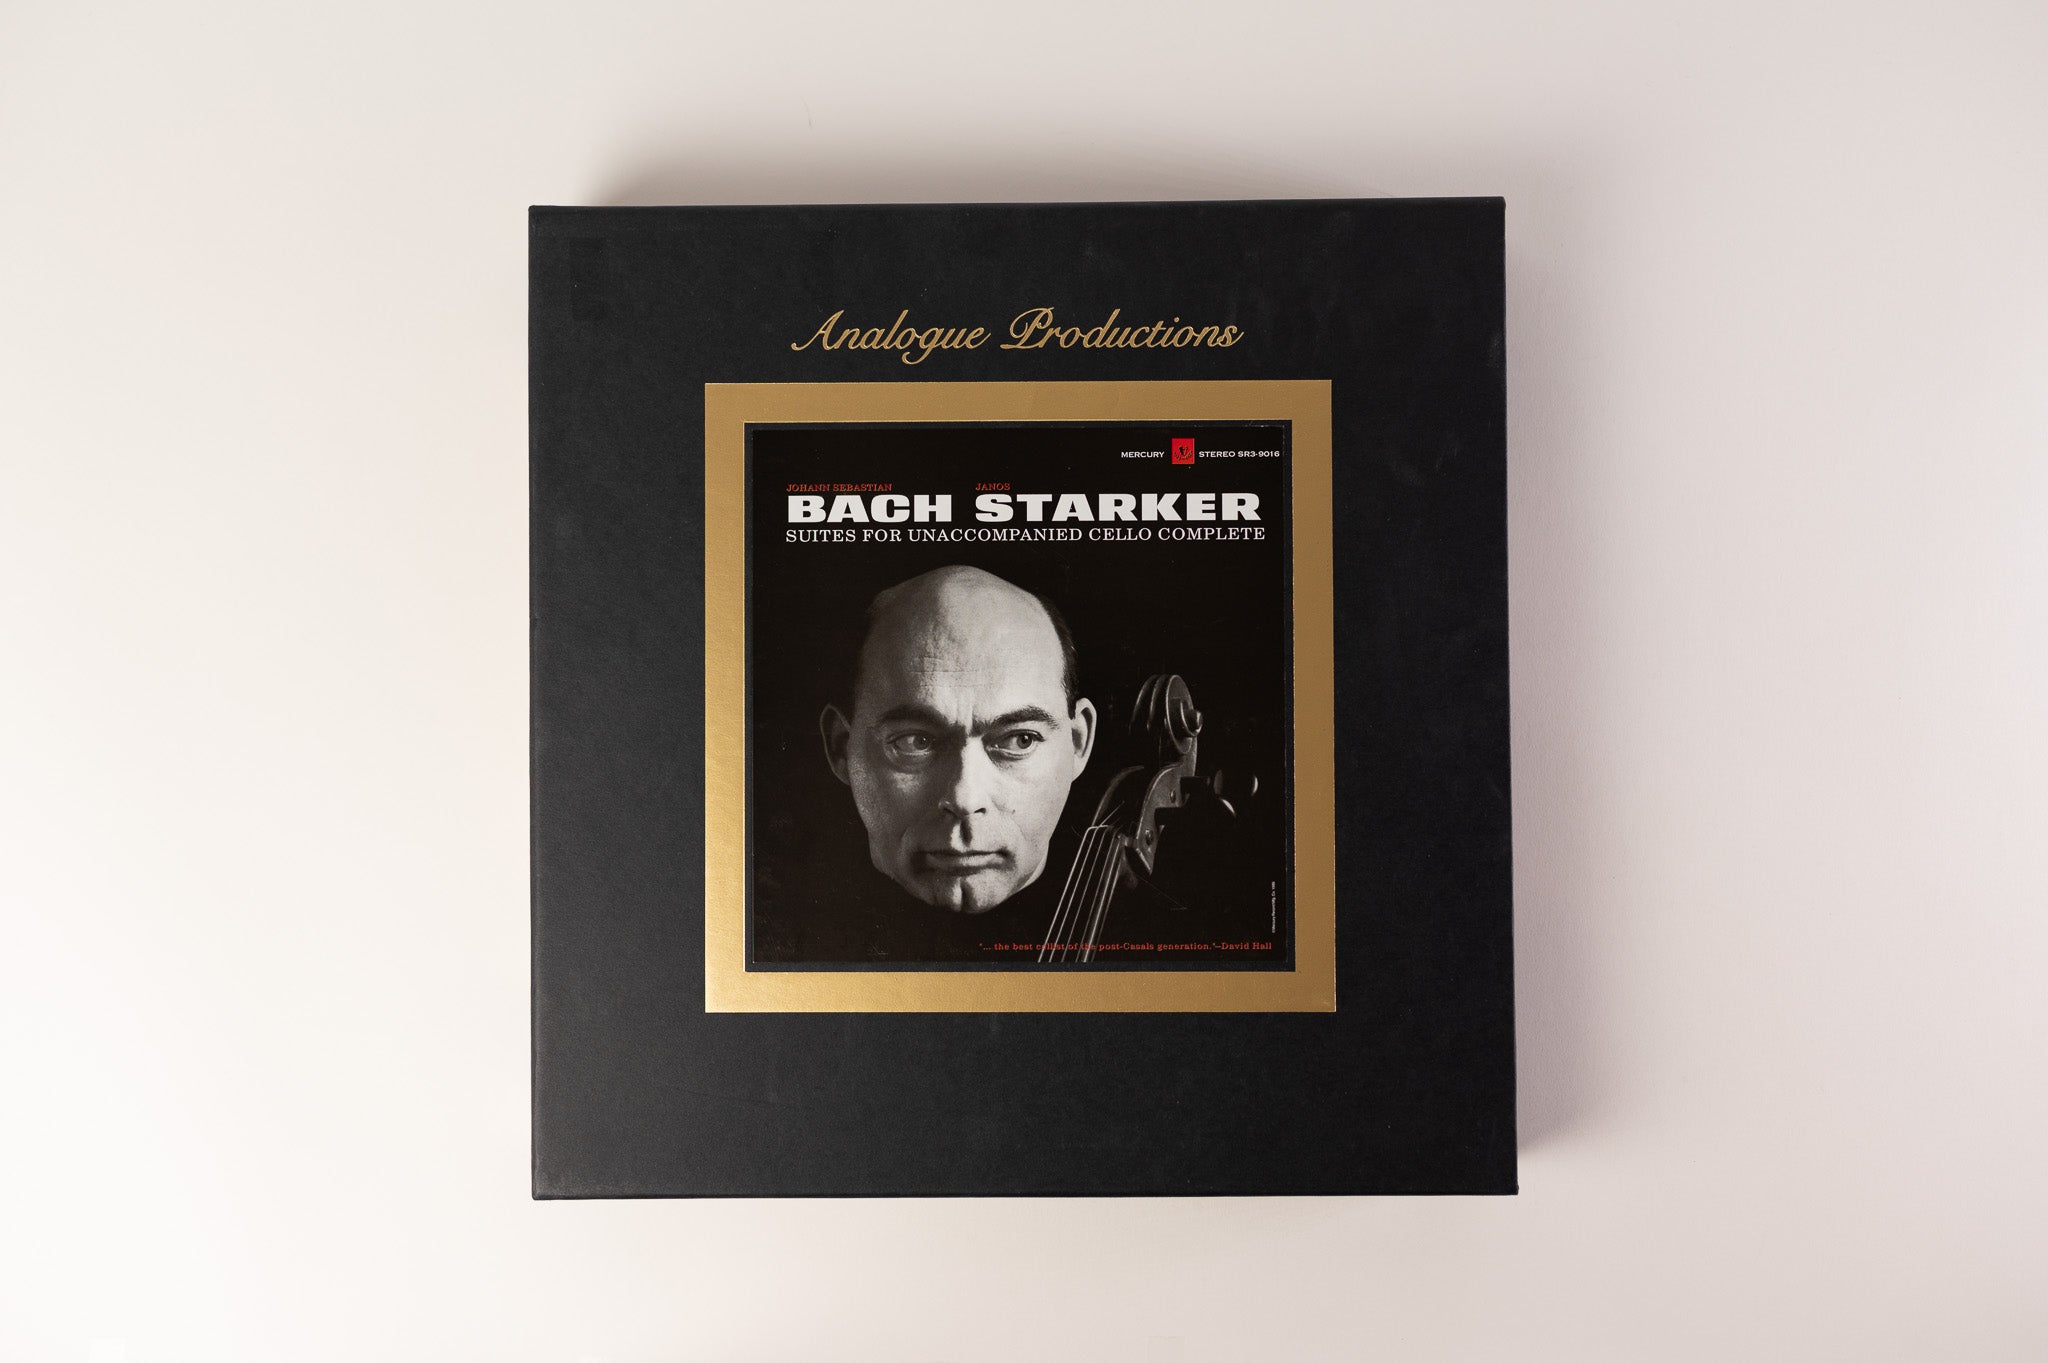 Johann Sebastian Bach - Suites For Unaccompanied Cello Complete on Analogue Productions Deluxe Ltd Box Set